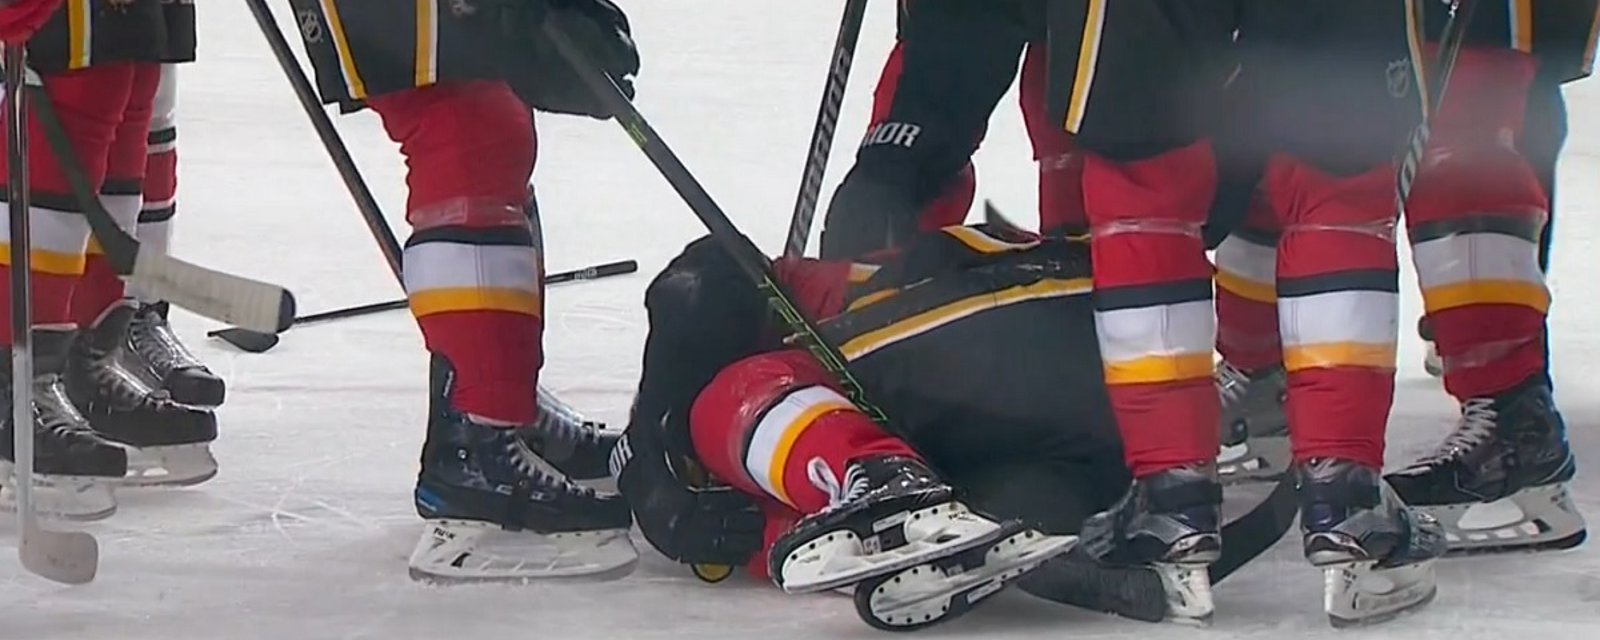 Breaking: NHL veteran goes down with a knee injury, then takes a slap shot to the head.